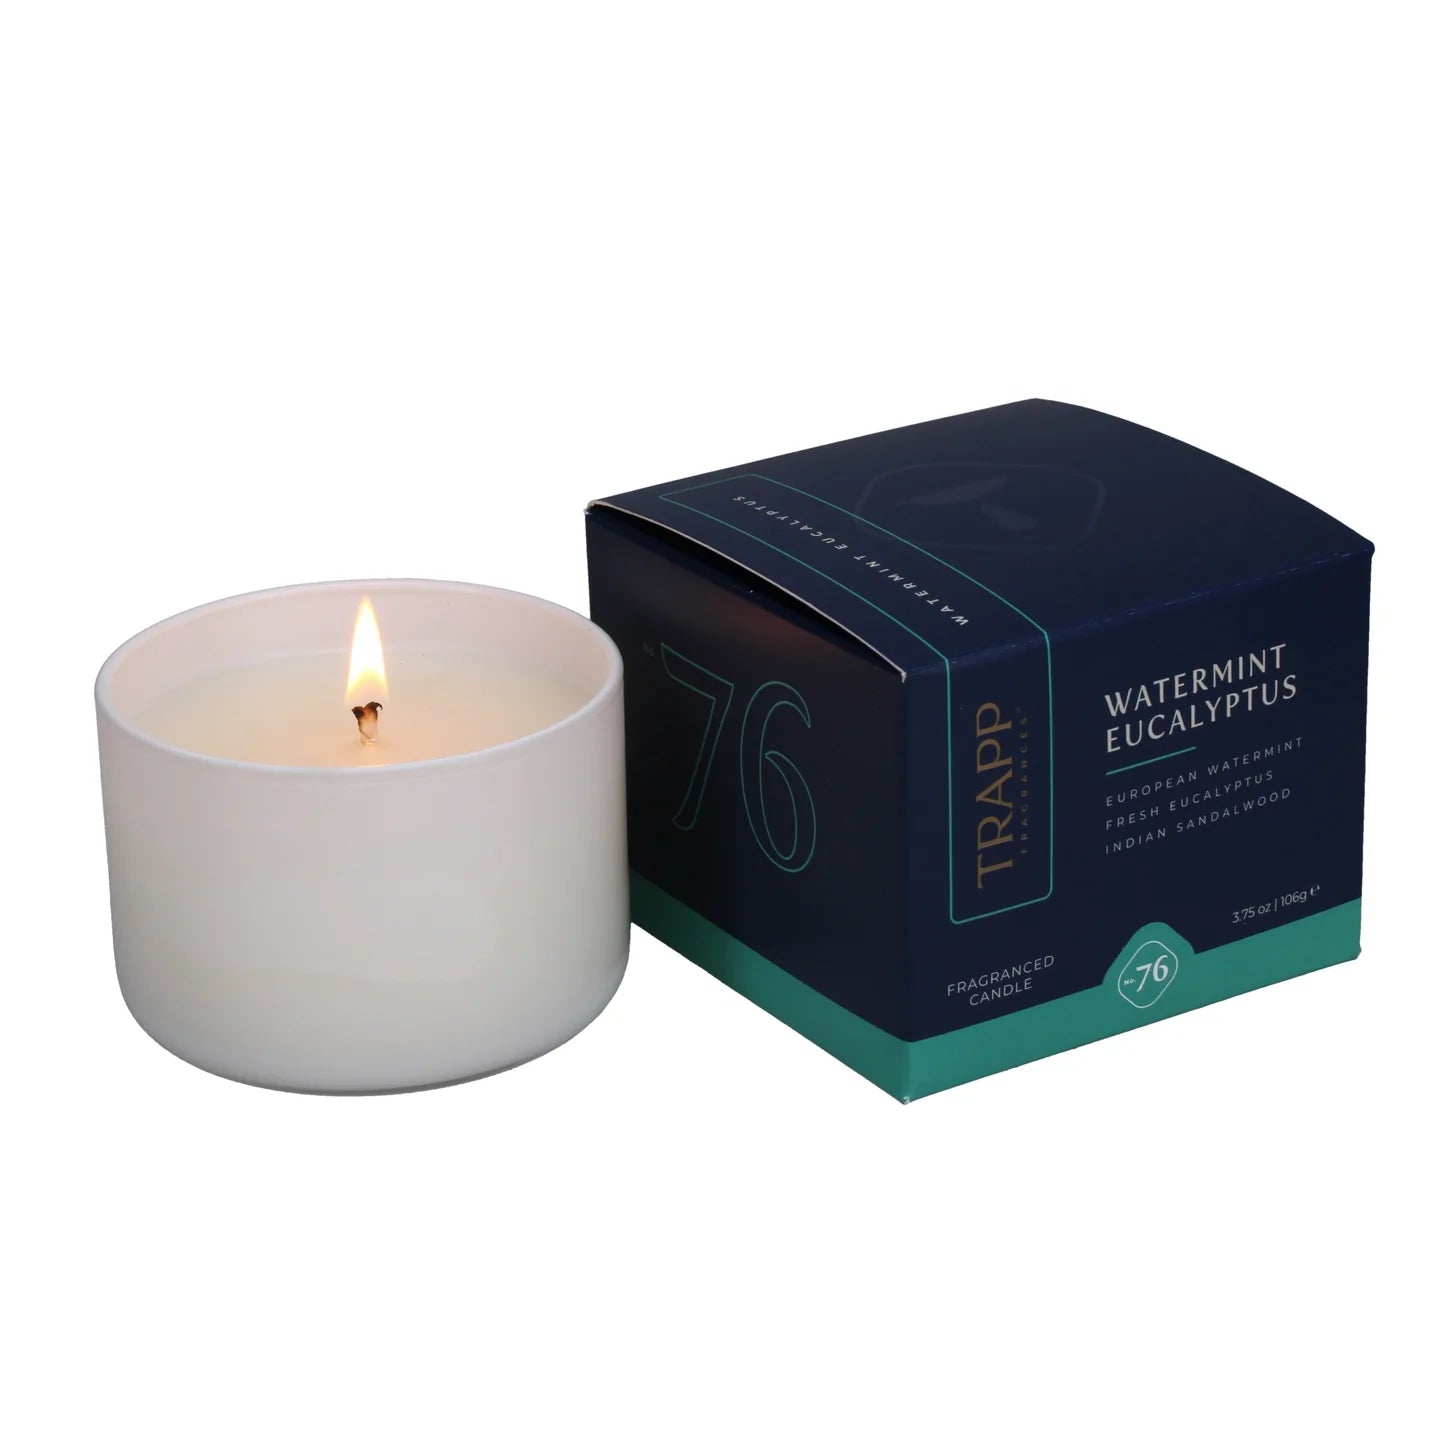 Watermint Eucalyptus Trapp Candle